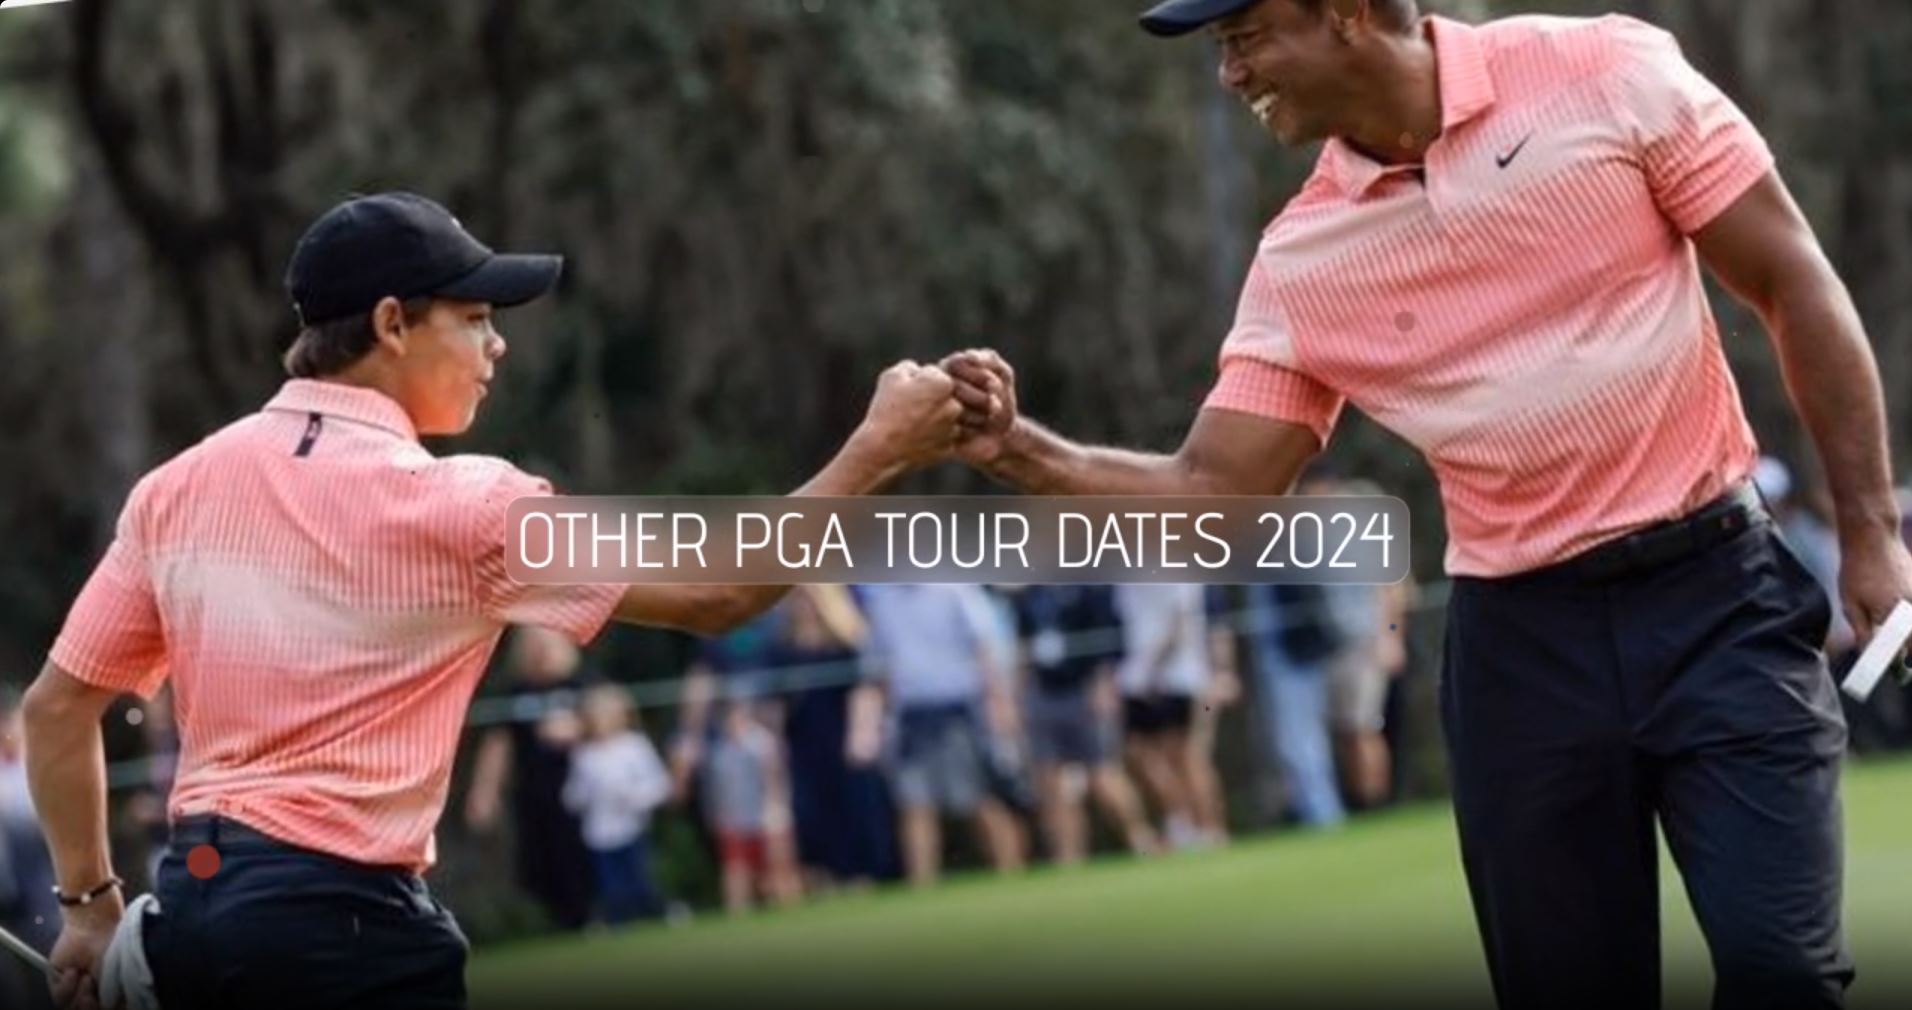 Buy vip tickets and corporate hospitality to every pga tour golf tournament in 2024